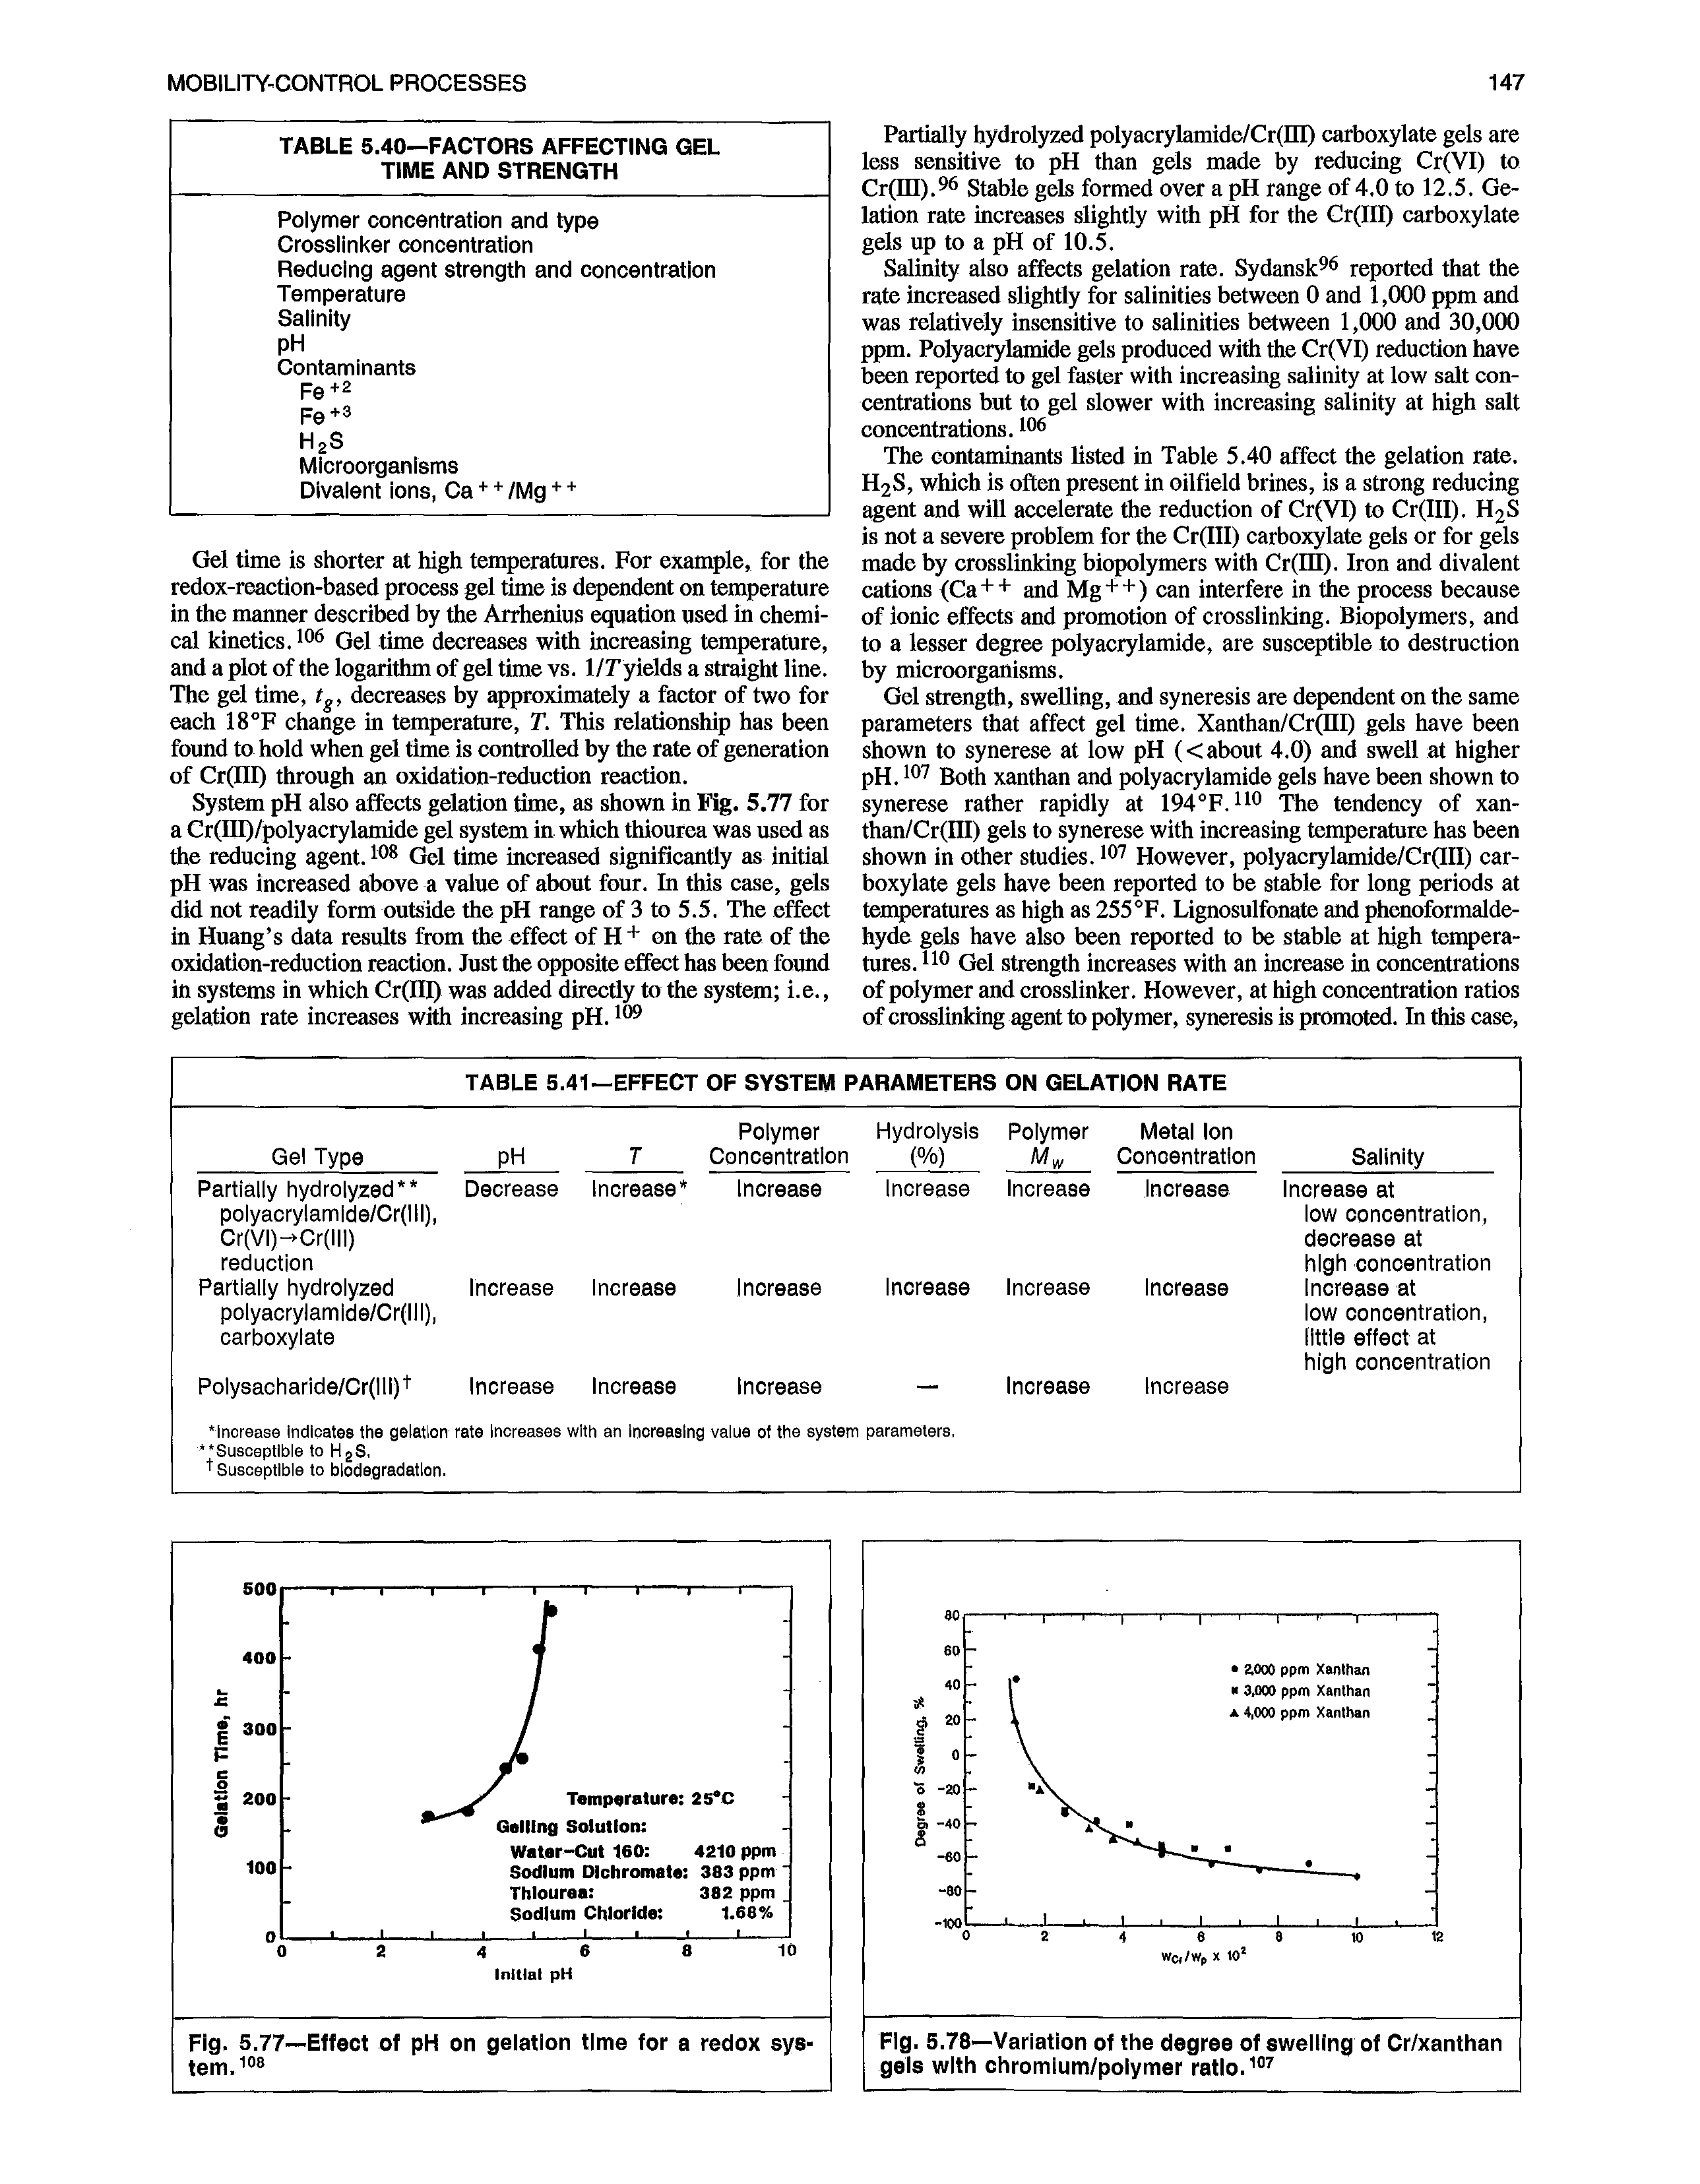 Fig. 5.78—Variation of the degree of ewelling of Cr/xanthan gele with chromium/polymer ratio.